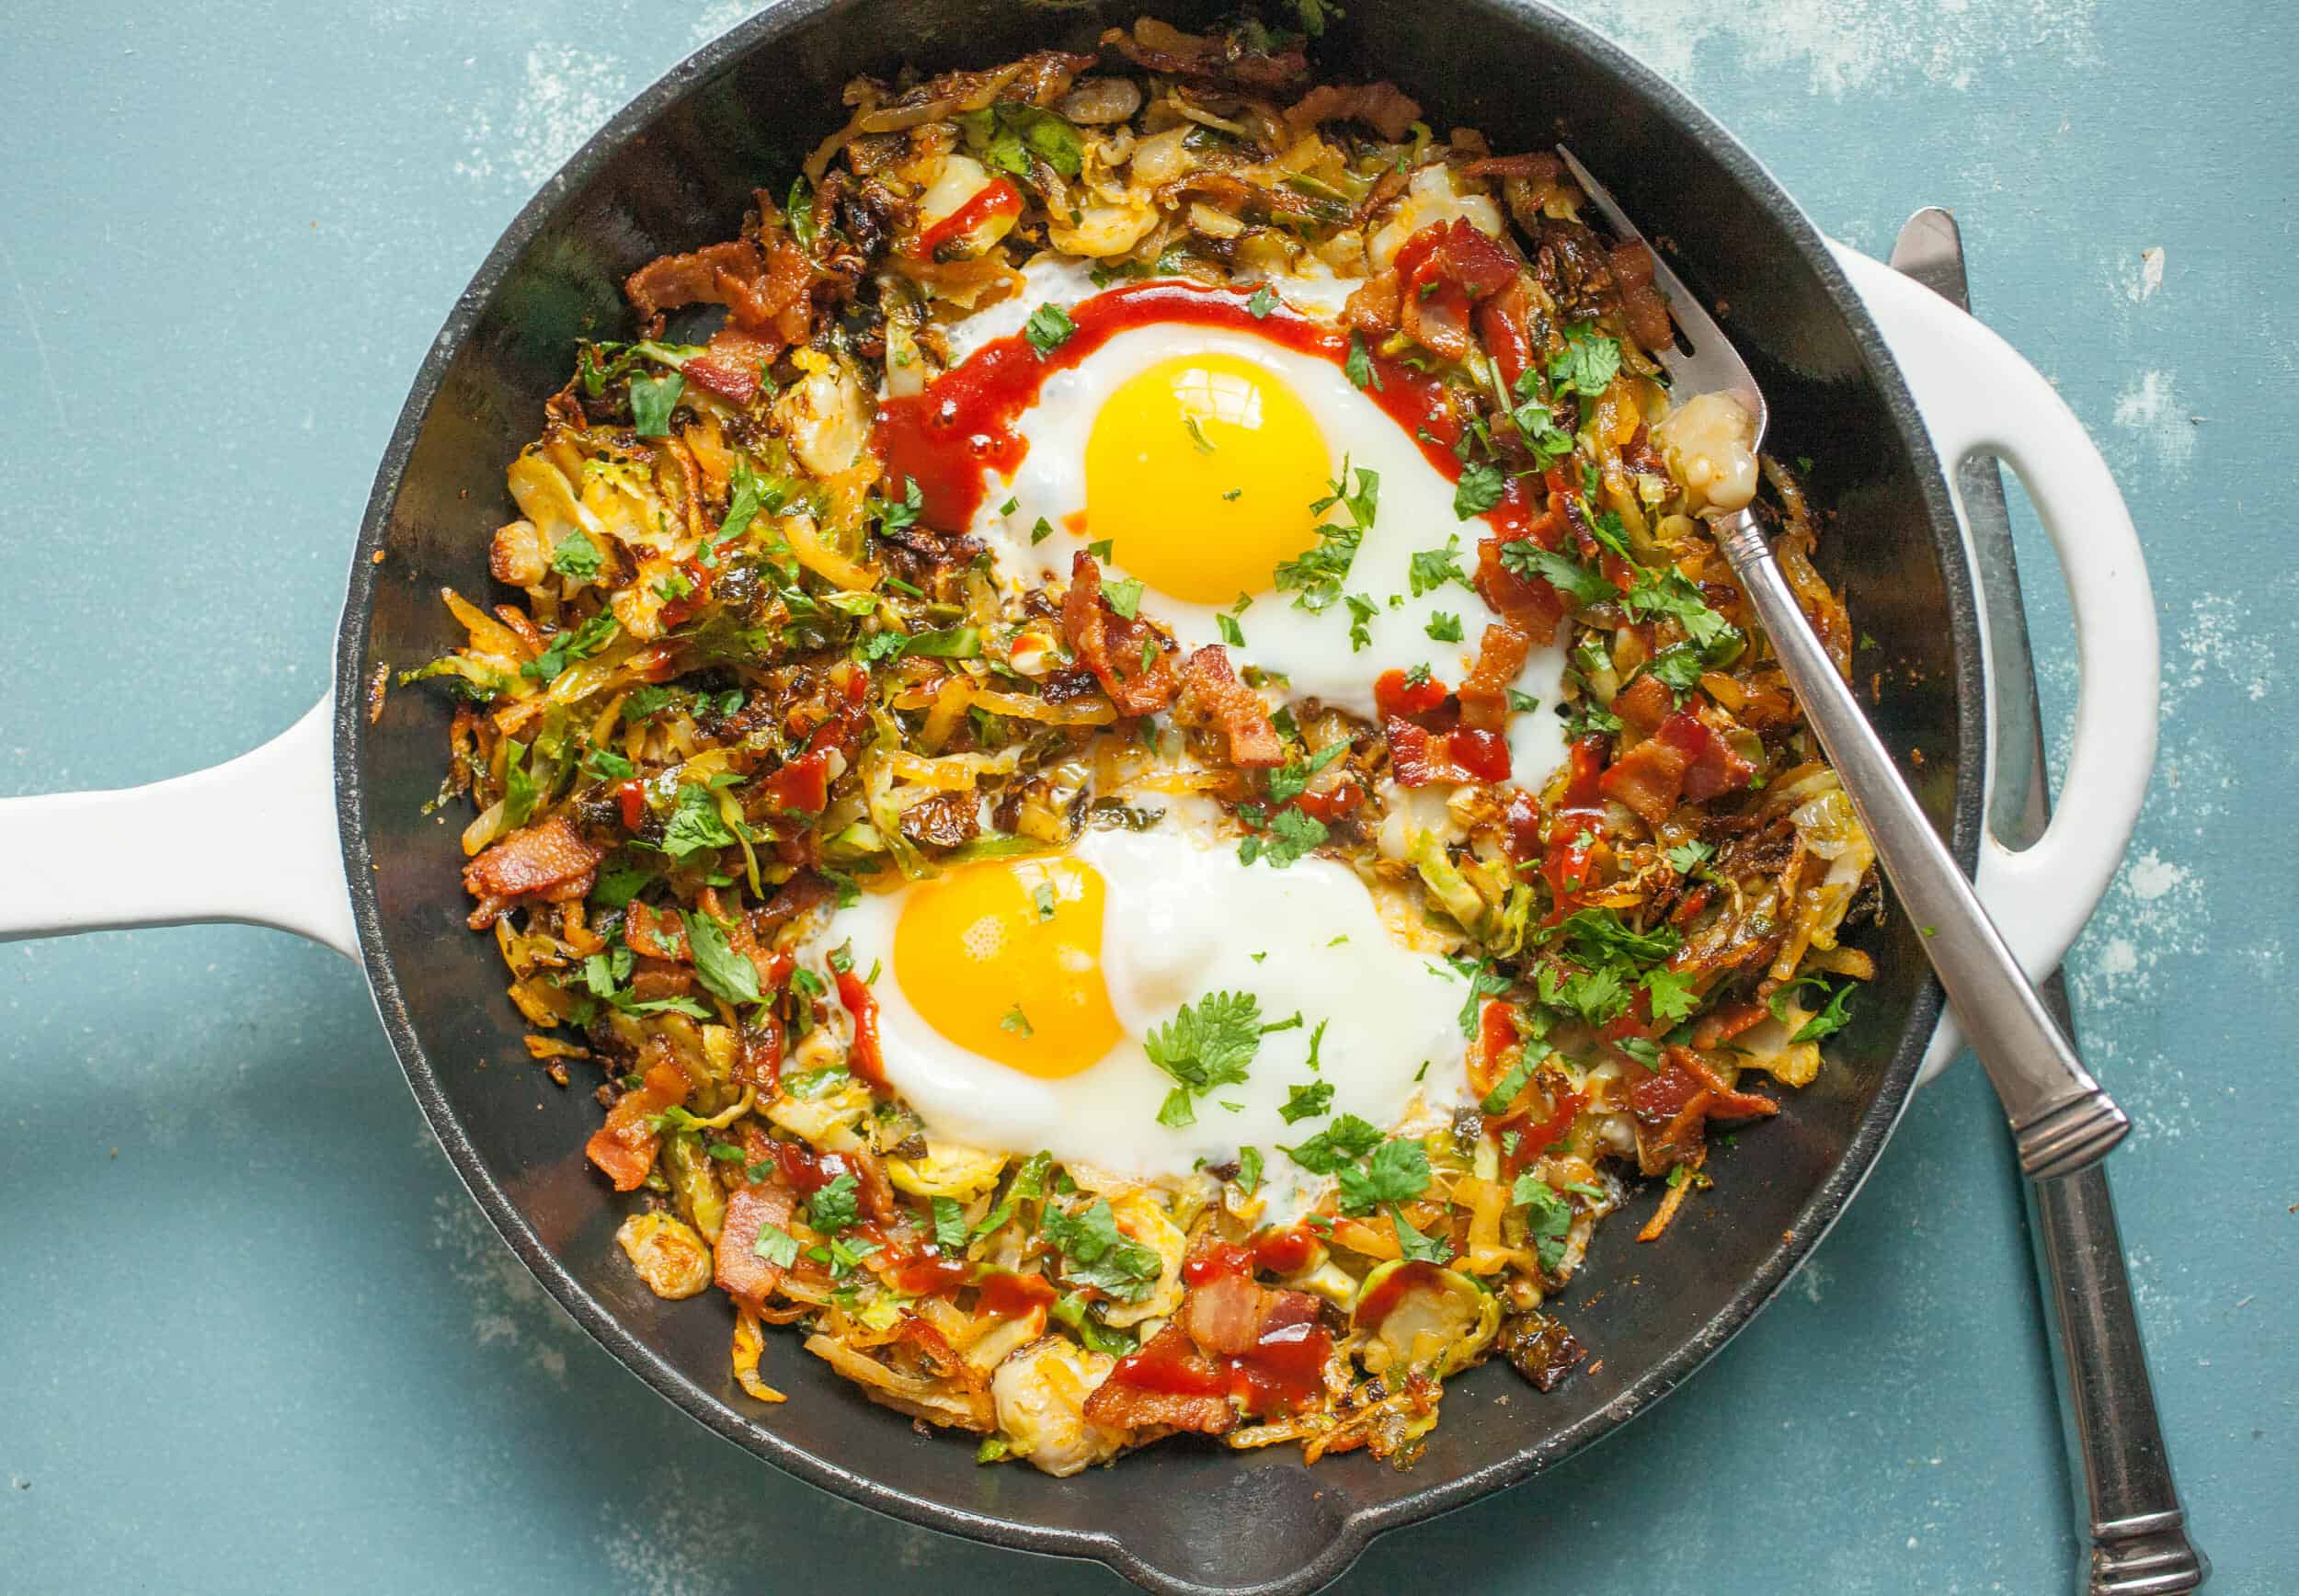 Brussels Sprouts Breakfast Hash